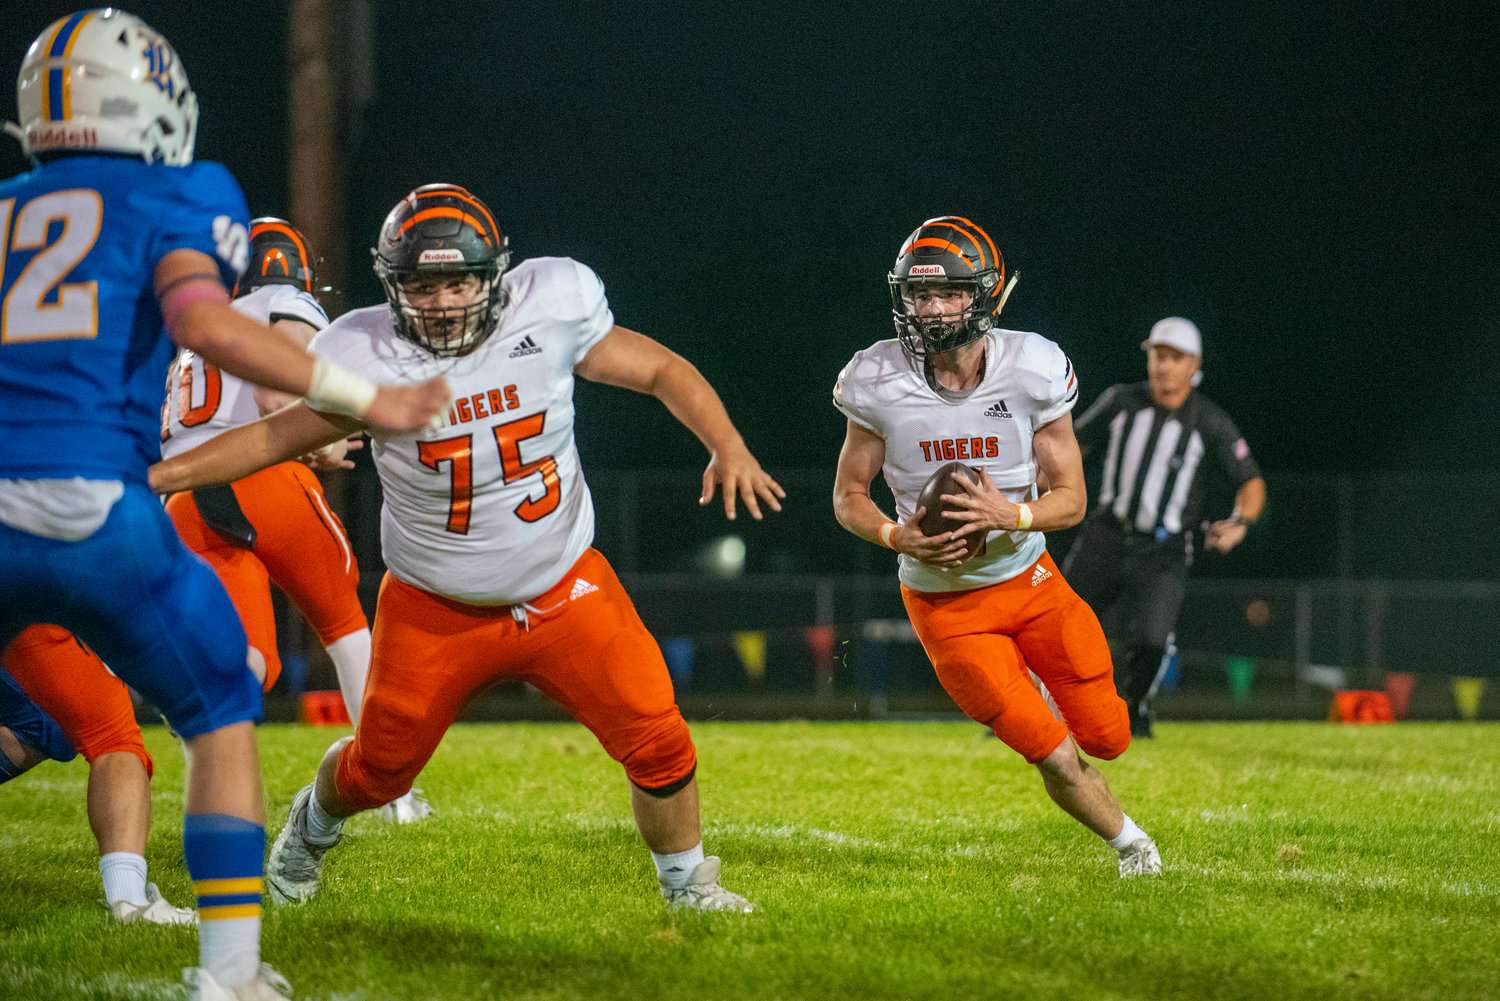 Centralia’s Chase Sobolesky (2) looks for a hole against Rochester’s defense while teammate Sebastian Bustos (75) provides blocking on Oct. 2, 2021.